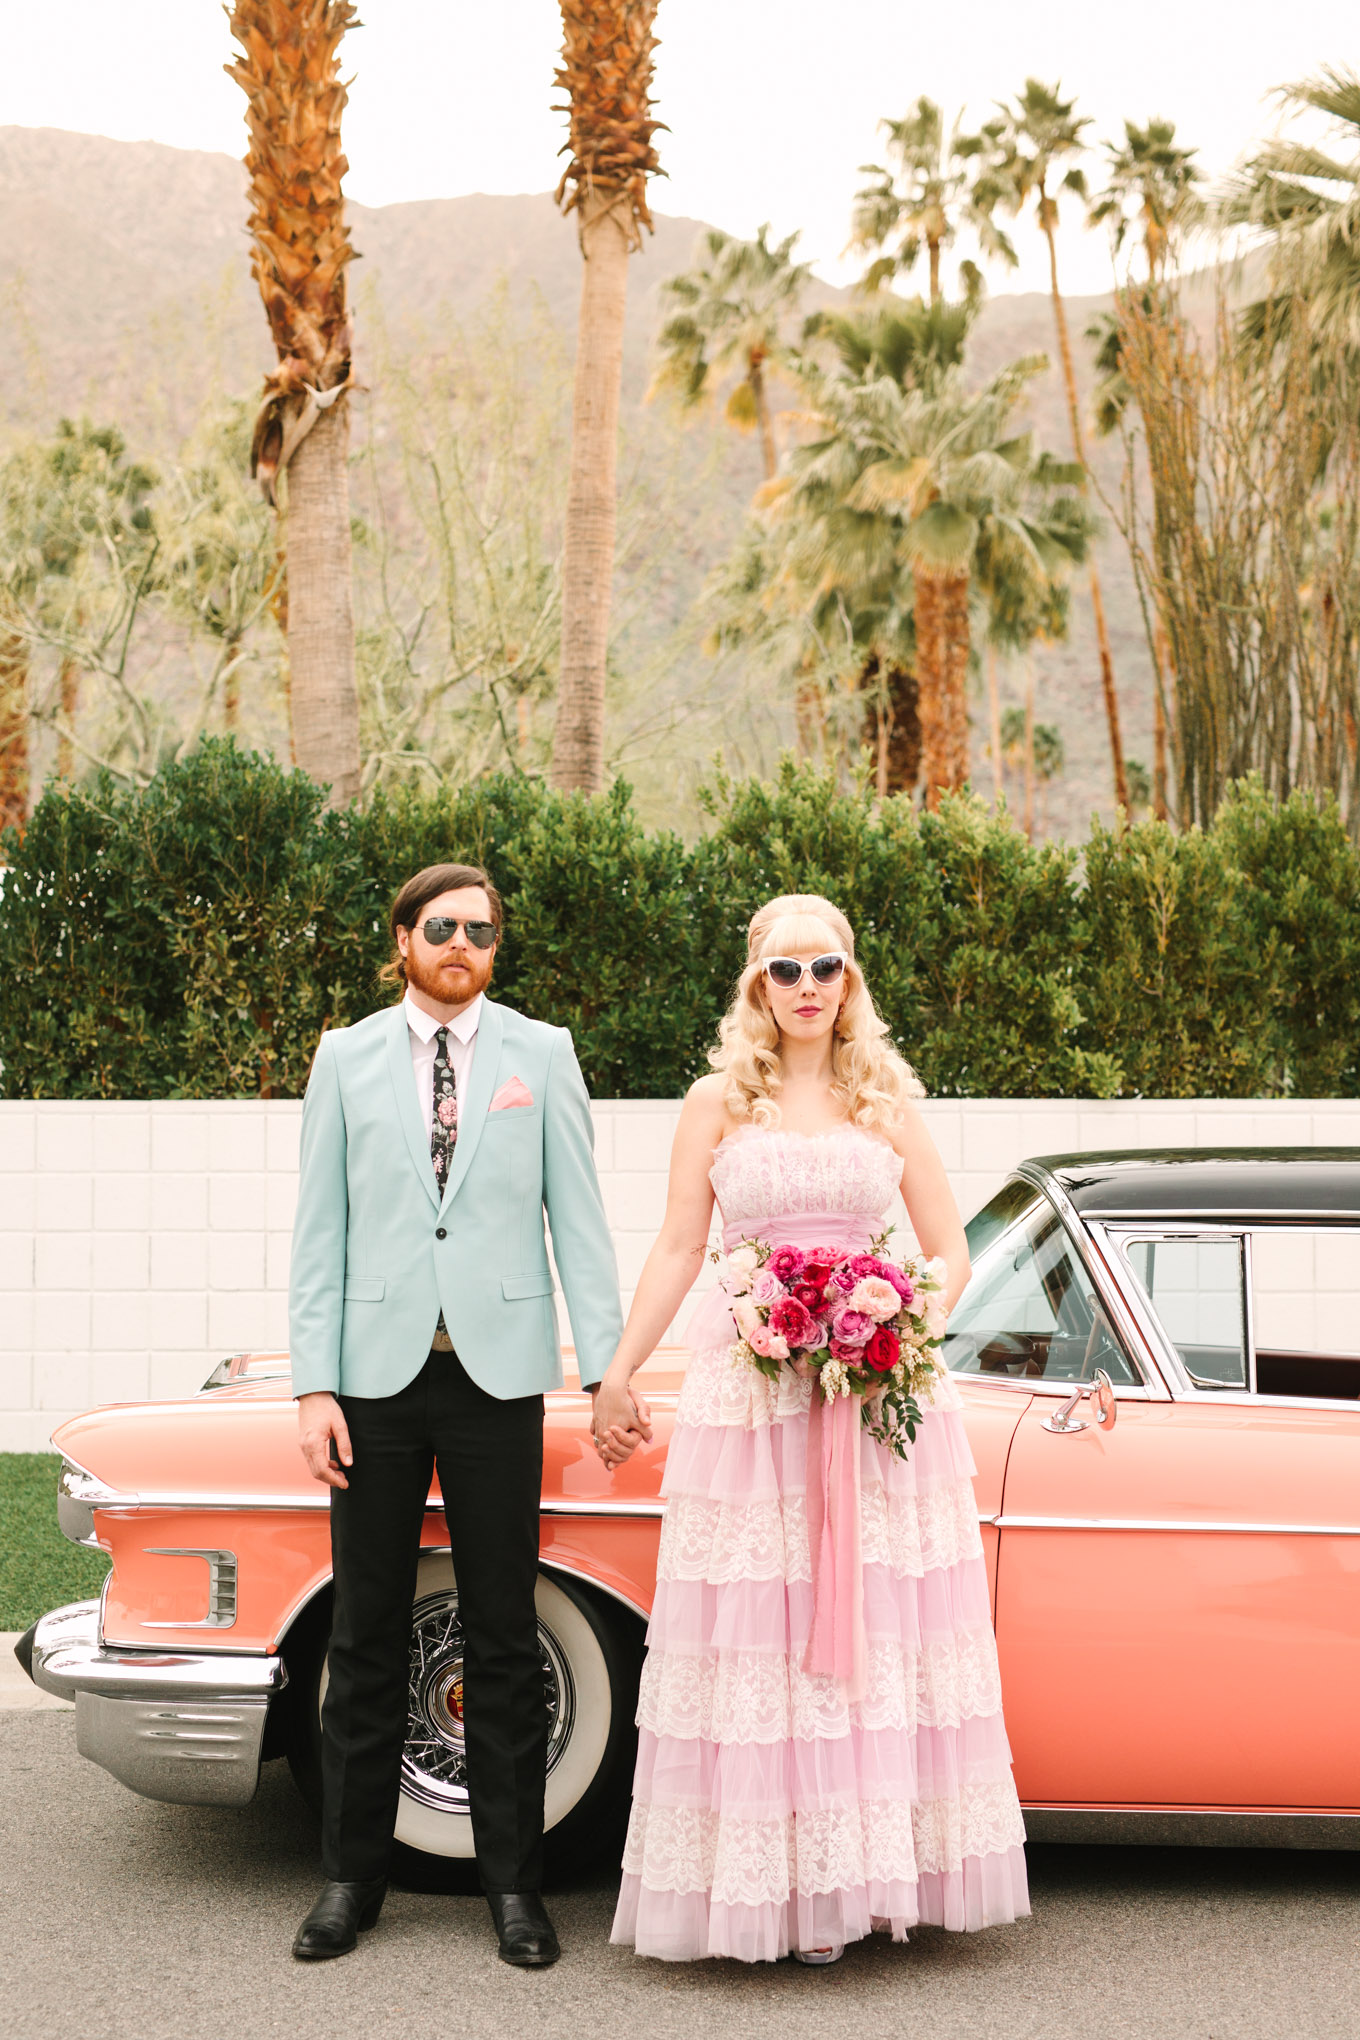 Retro couple with coral classic car. Modern vintage-inspired Palm Springs engagement session with a 1960s pink Cadillac, retro clothing, and flowers by Shindig Chic. | Colorful and elevated wedding inspiration for fun-loving couples in Southern California | #engagementsession #PalmSpringsengagement #vintageweddingdress #floralcar #pinkcar   Source: Mary Costa Photography | Los Angeles